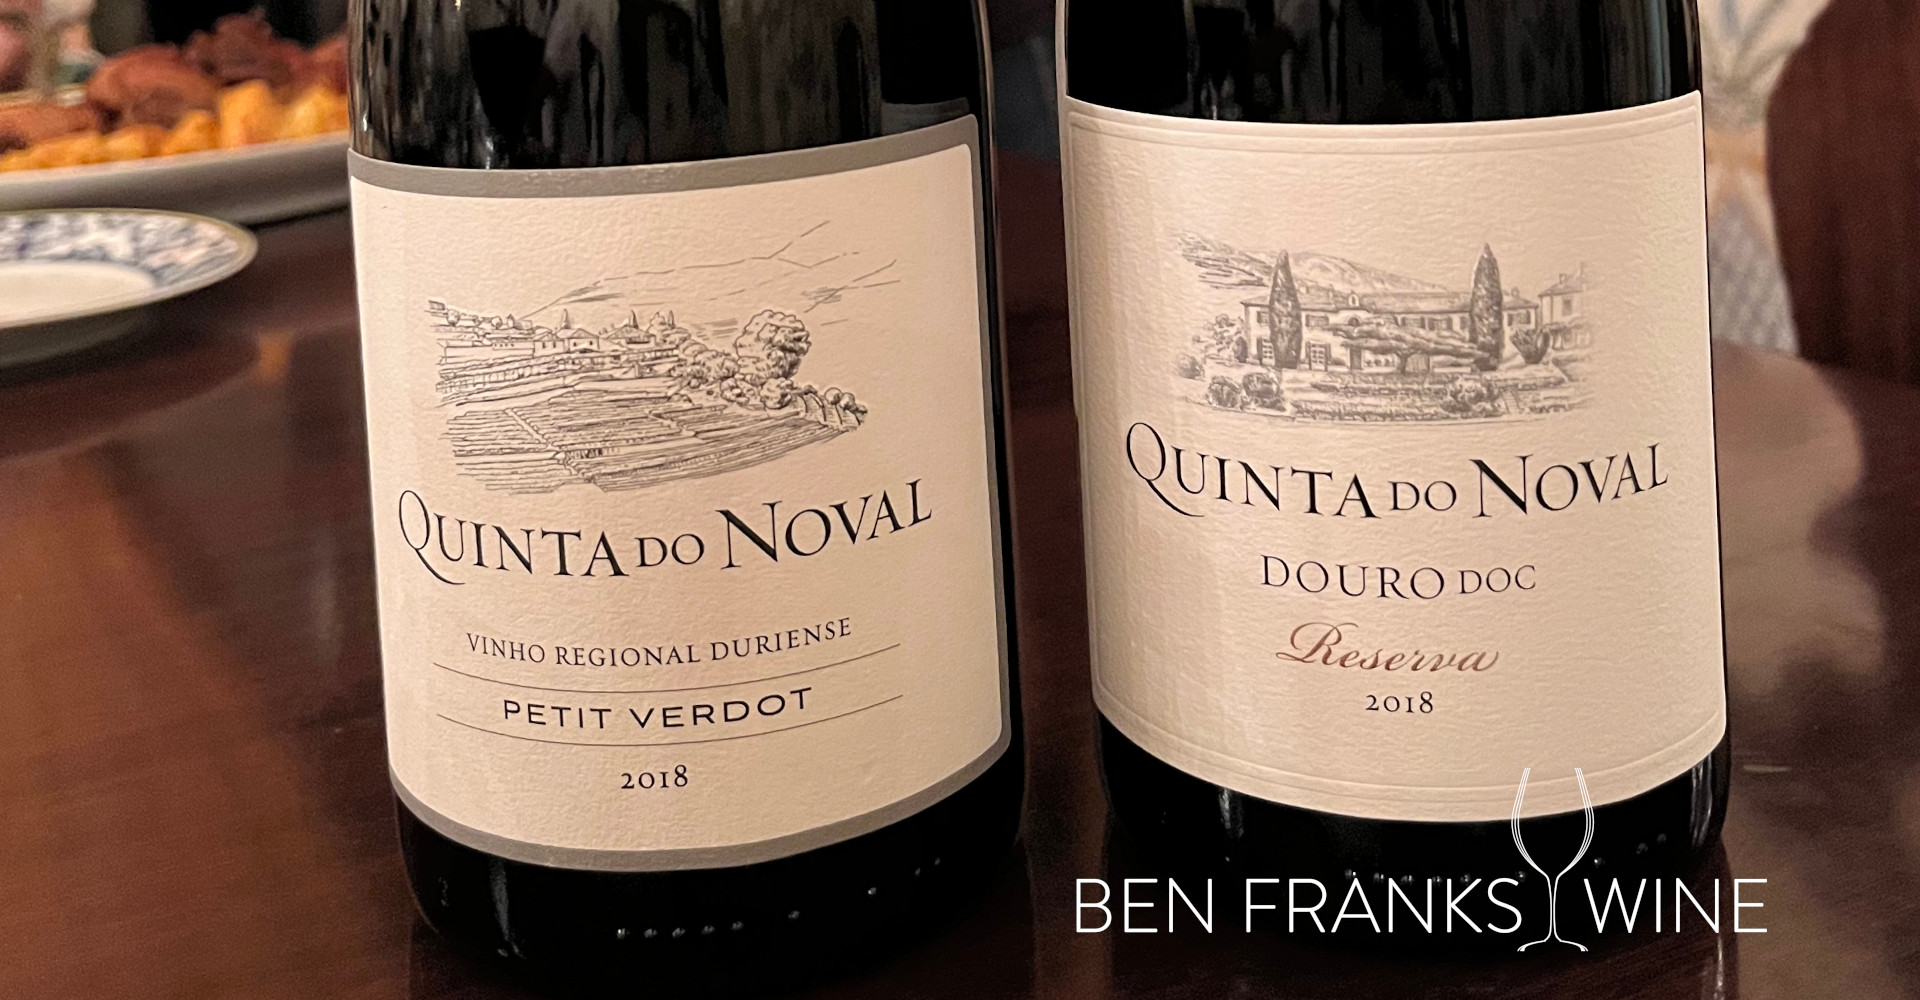 Petit Verdot and the Douro DOC Reserve reds from Quinta do Noval